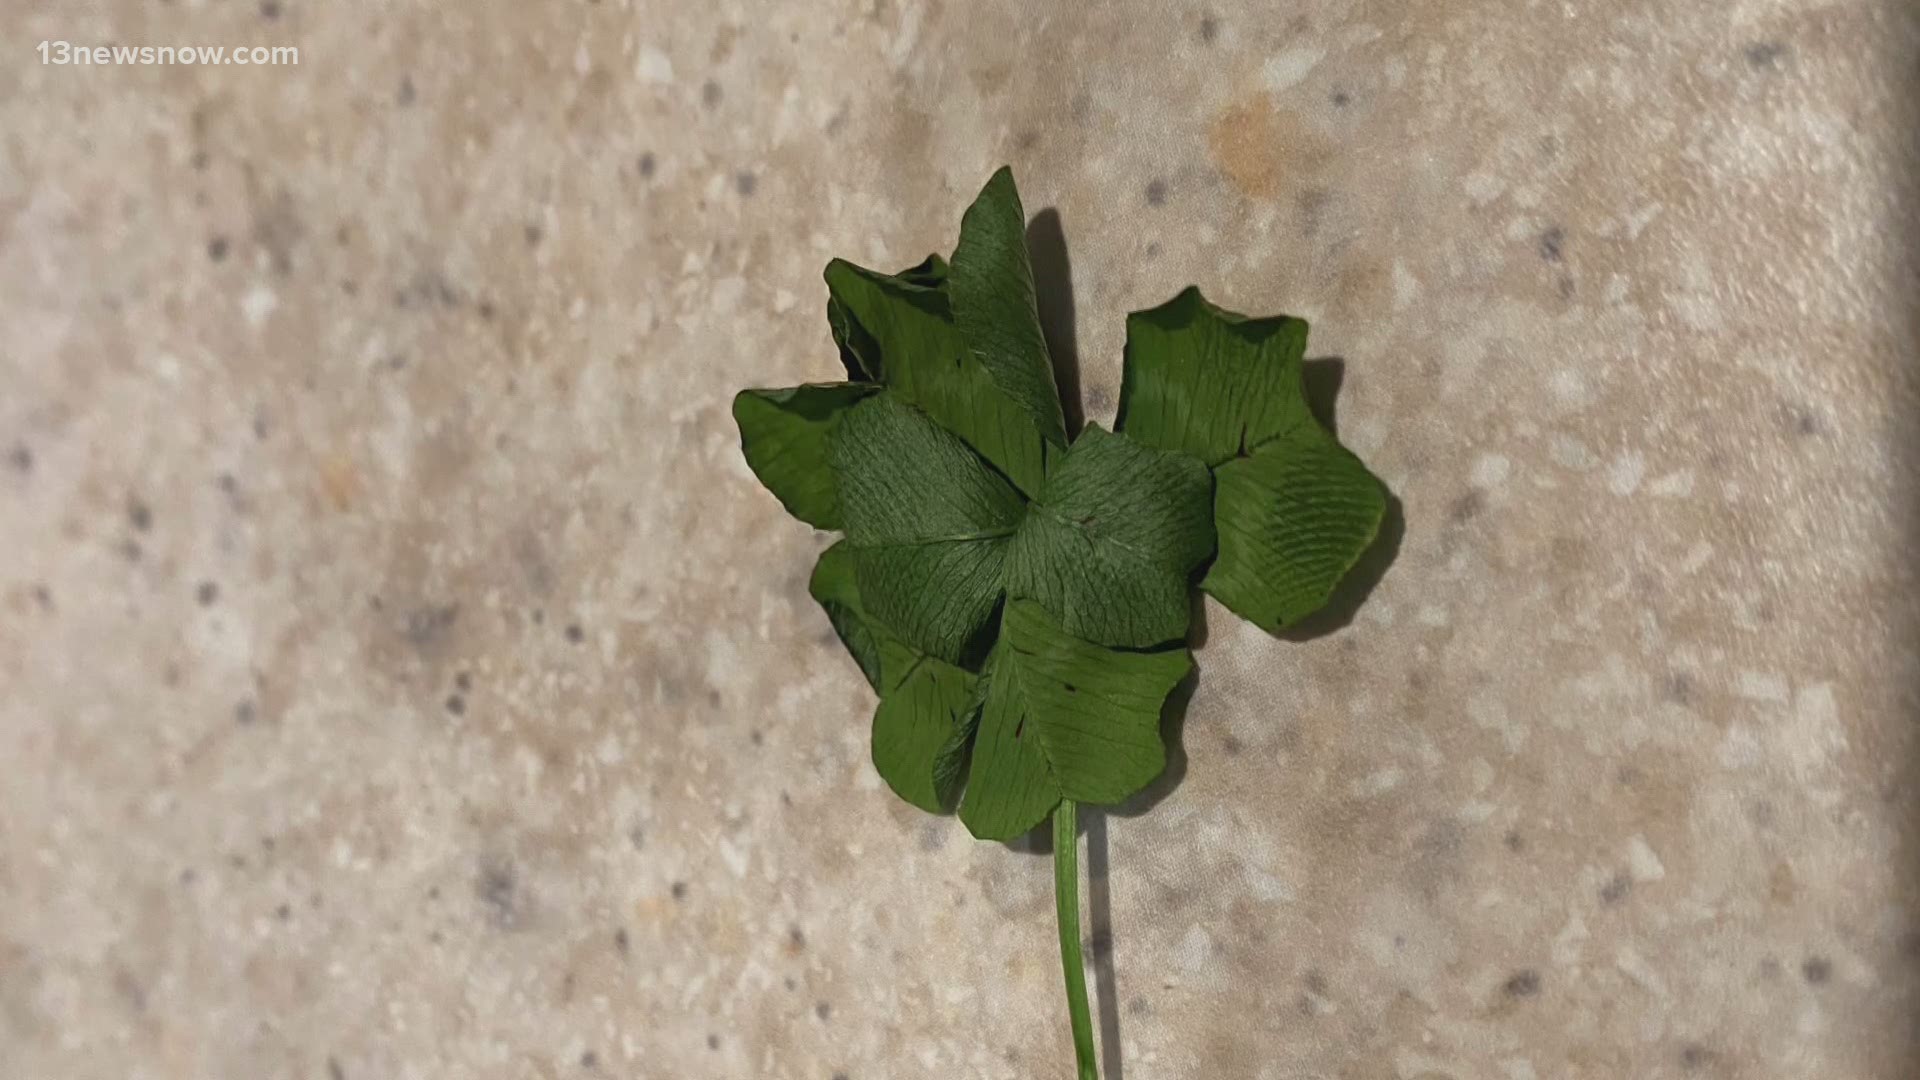 A set of twins in Virginia Beach could be getting extra lucky after they discovered a rare seven-leaf-clover right in their backyard.